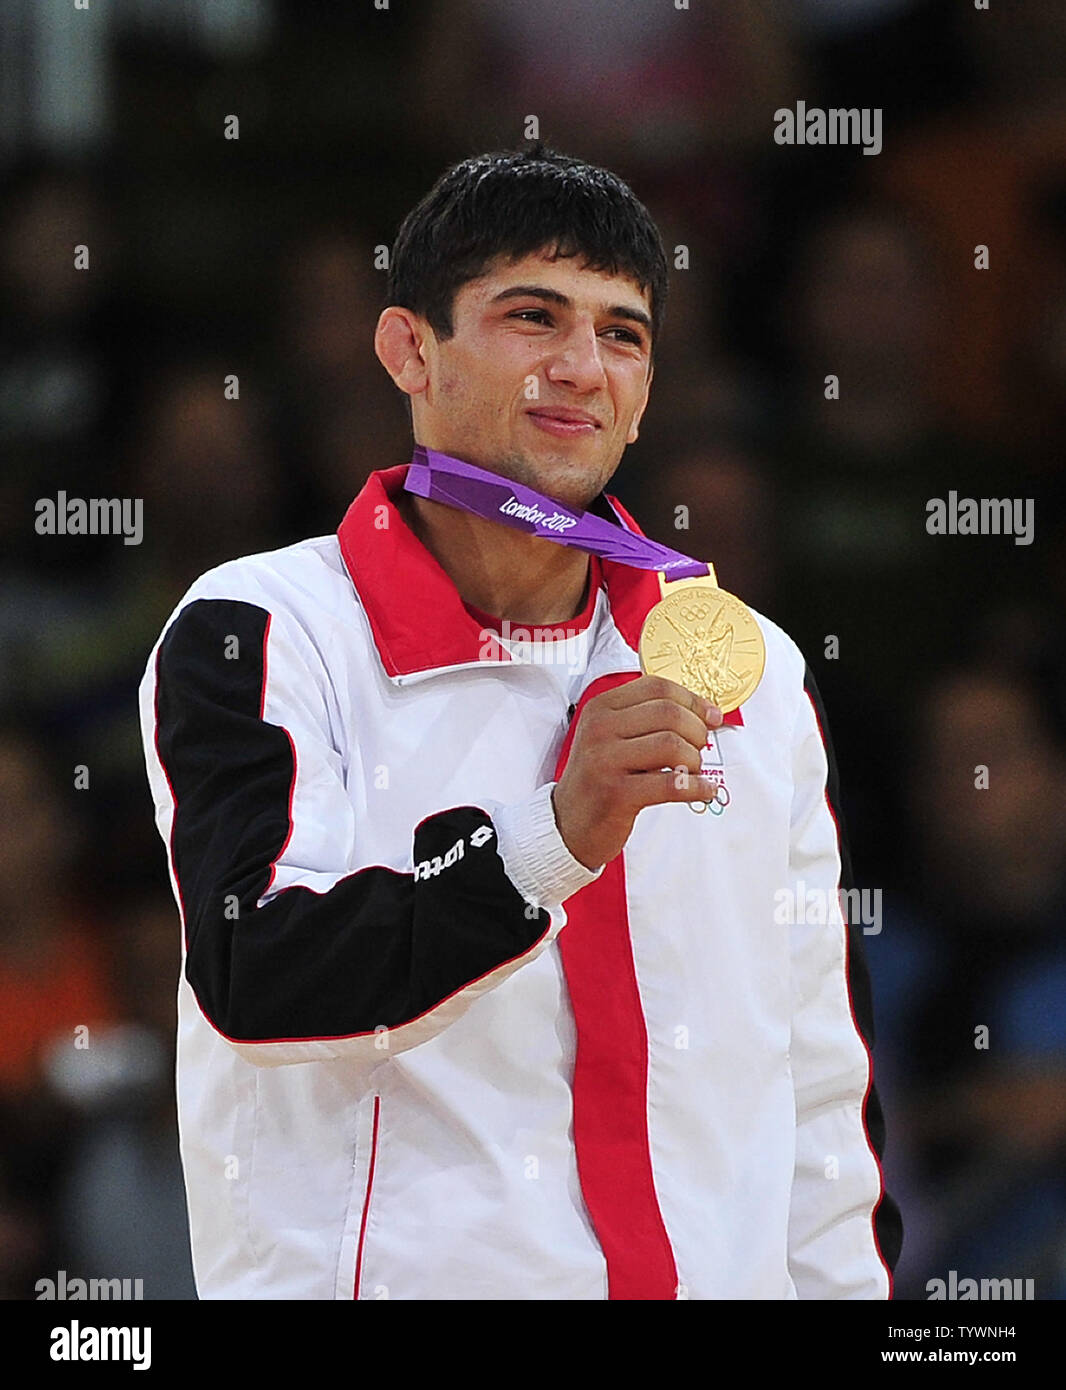 Lasha Shavdatuashvili of Georgia shows off his Gold Medal from his victory in the Men's Judo 66kg contest at the London 2012 Summer Olympic Games on July 29, 2012 in London. UPI/Ron Sachs Stock Photo